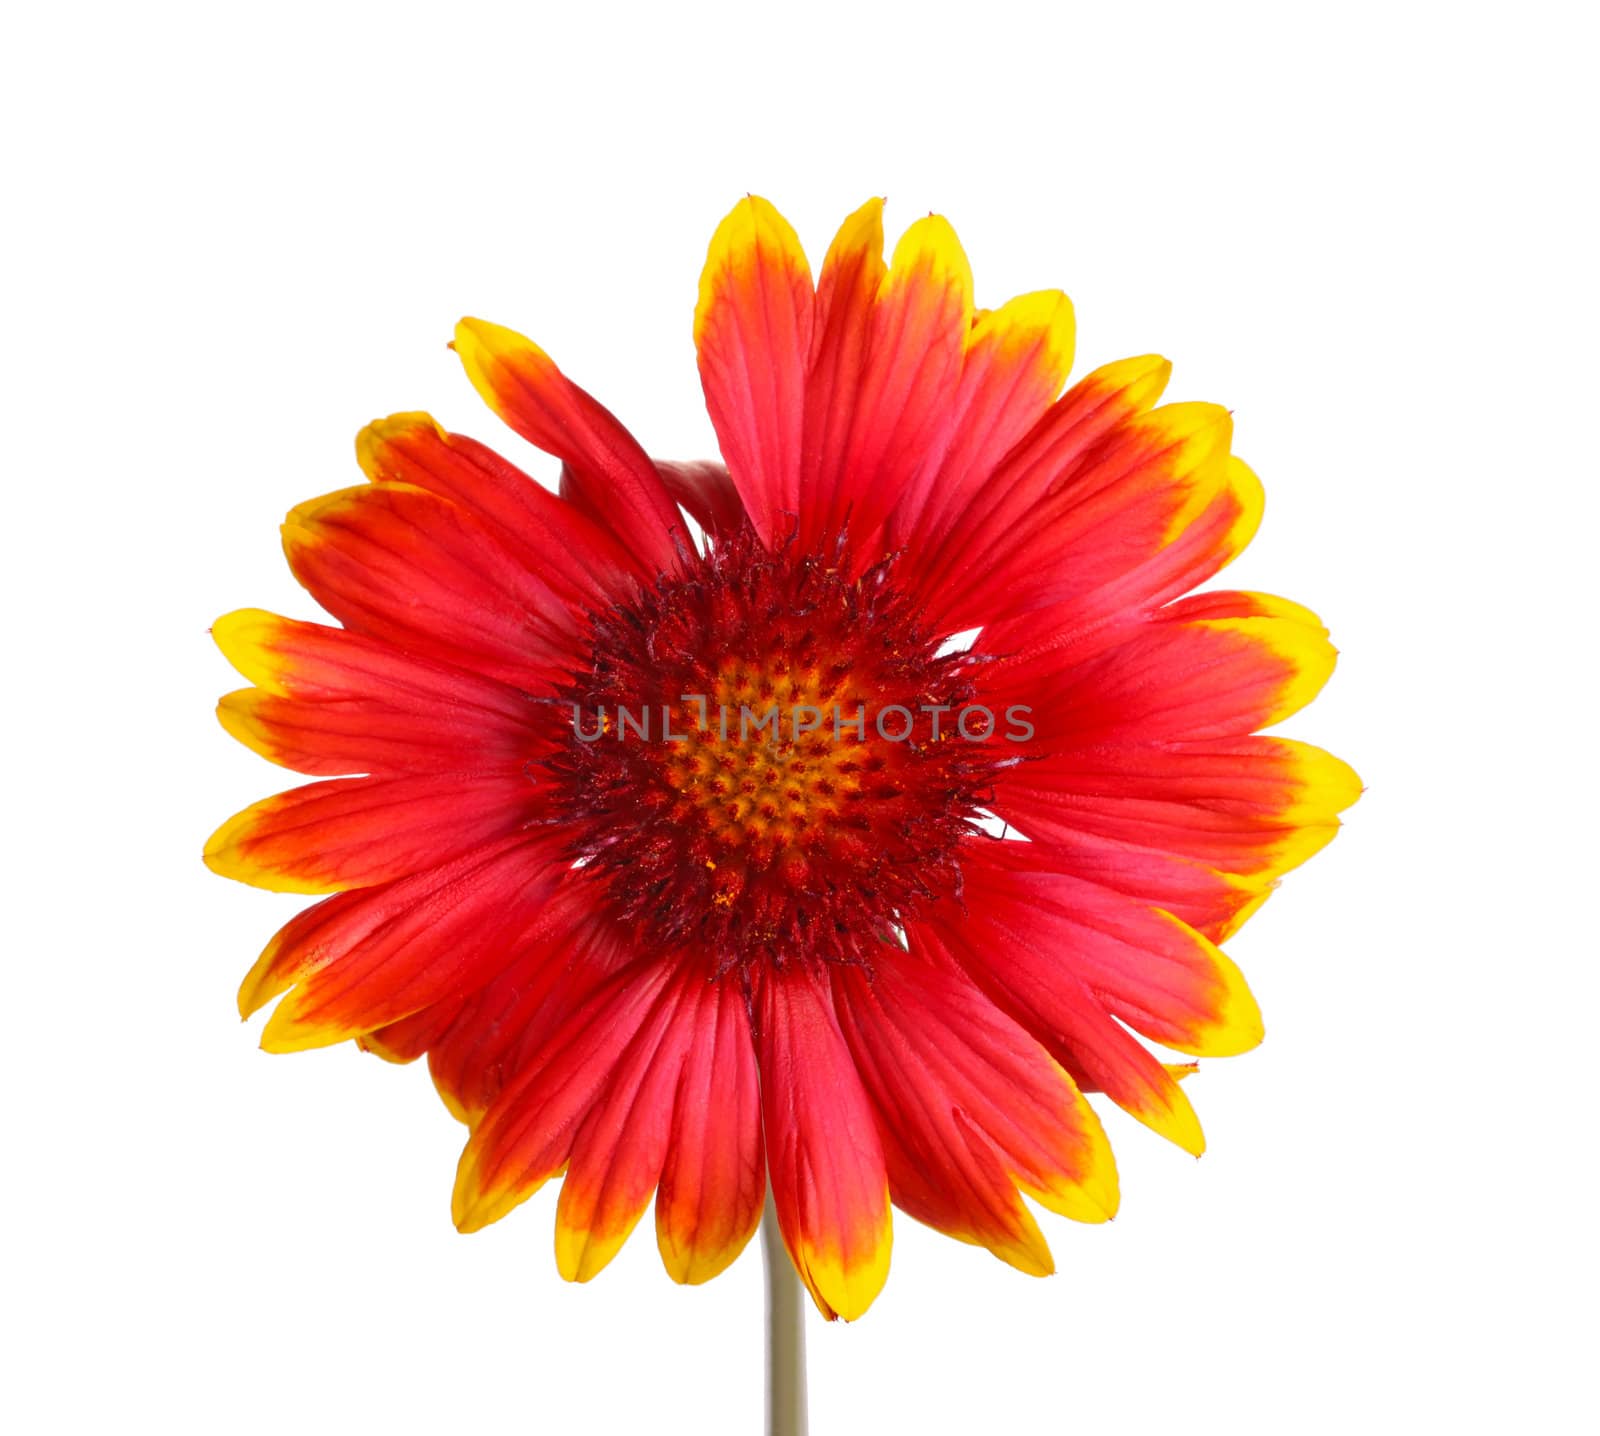 Red and yellow flower of a Gaillardia on white by sgoodwin4813